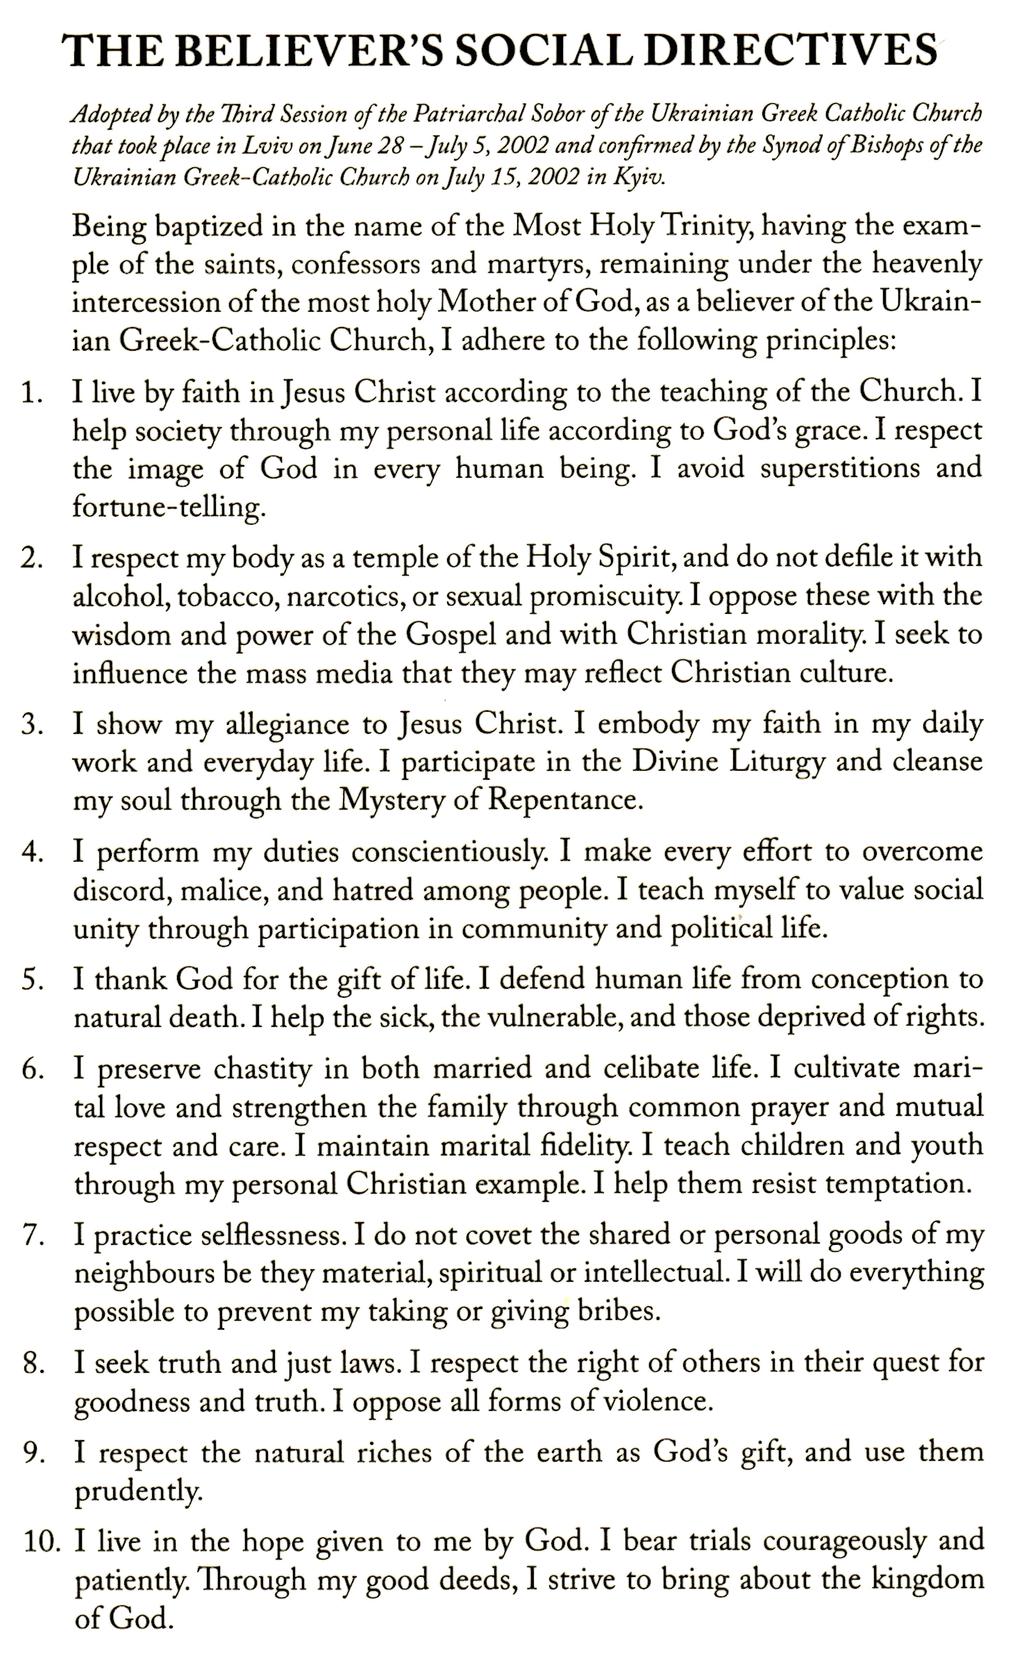 From the Compendium of Catechism of the